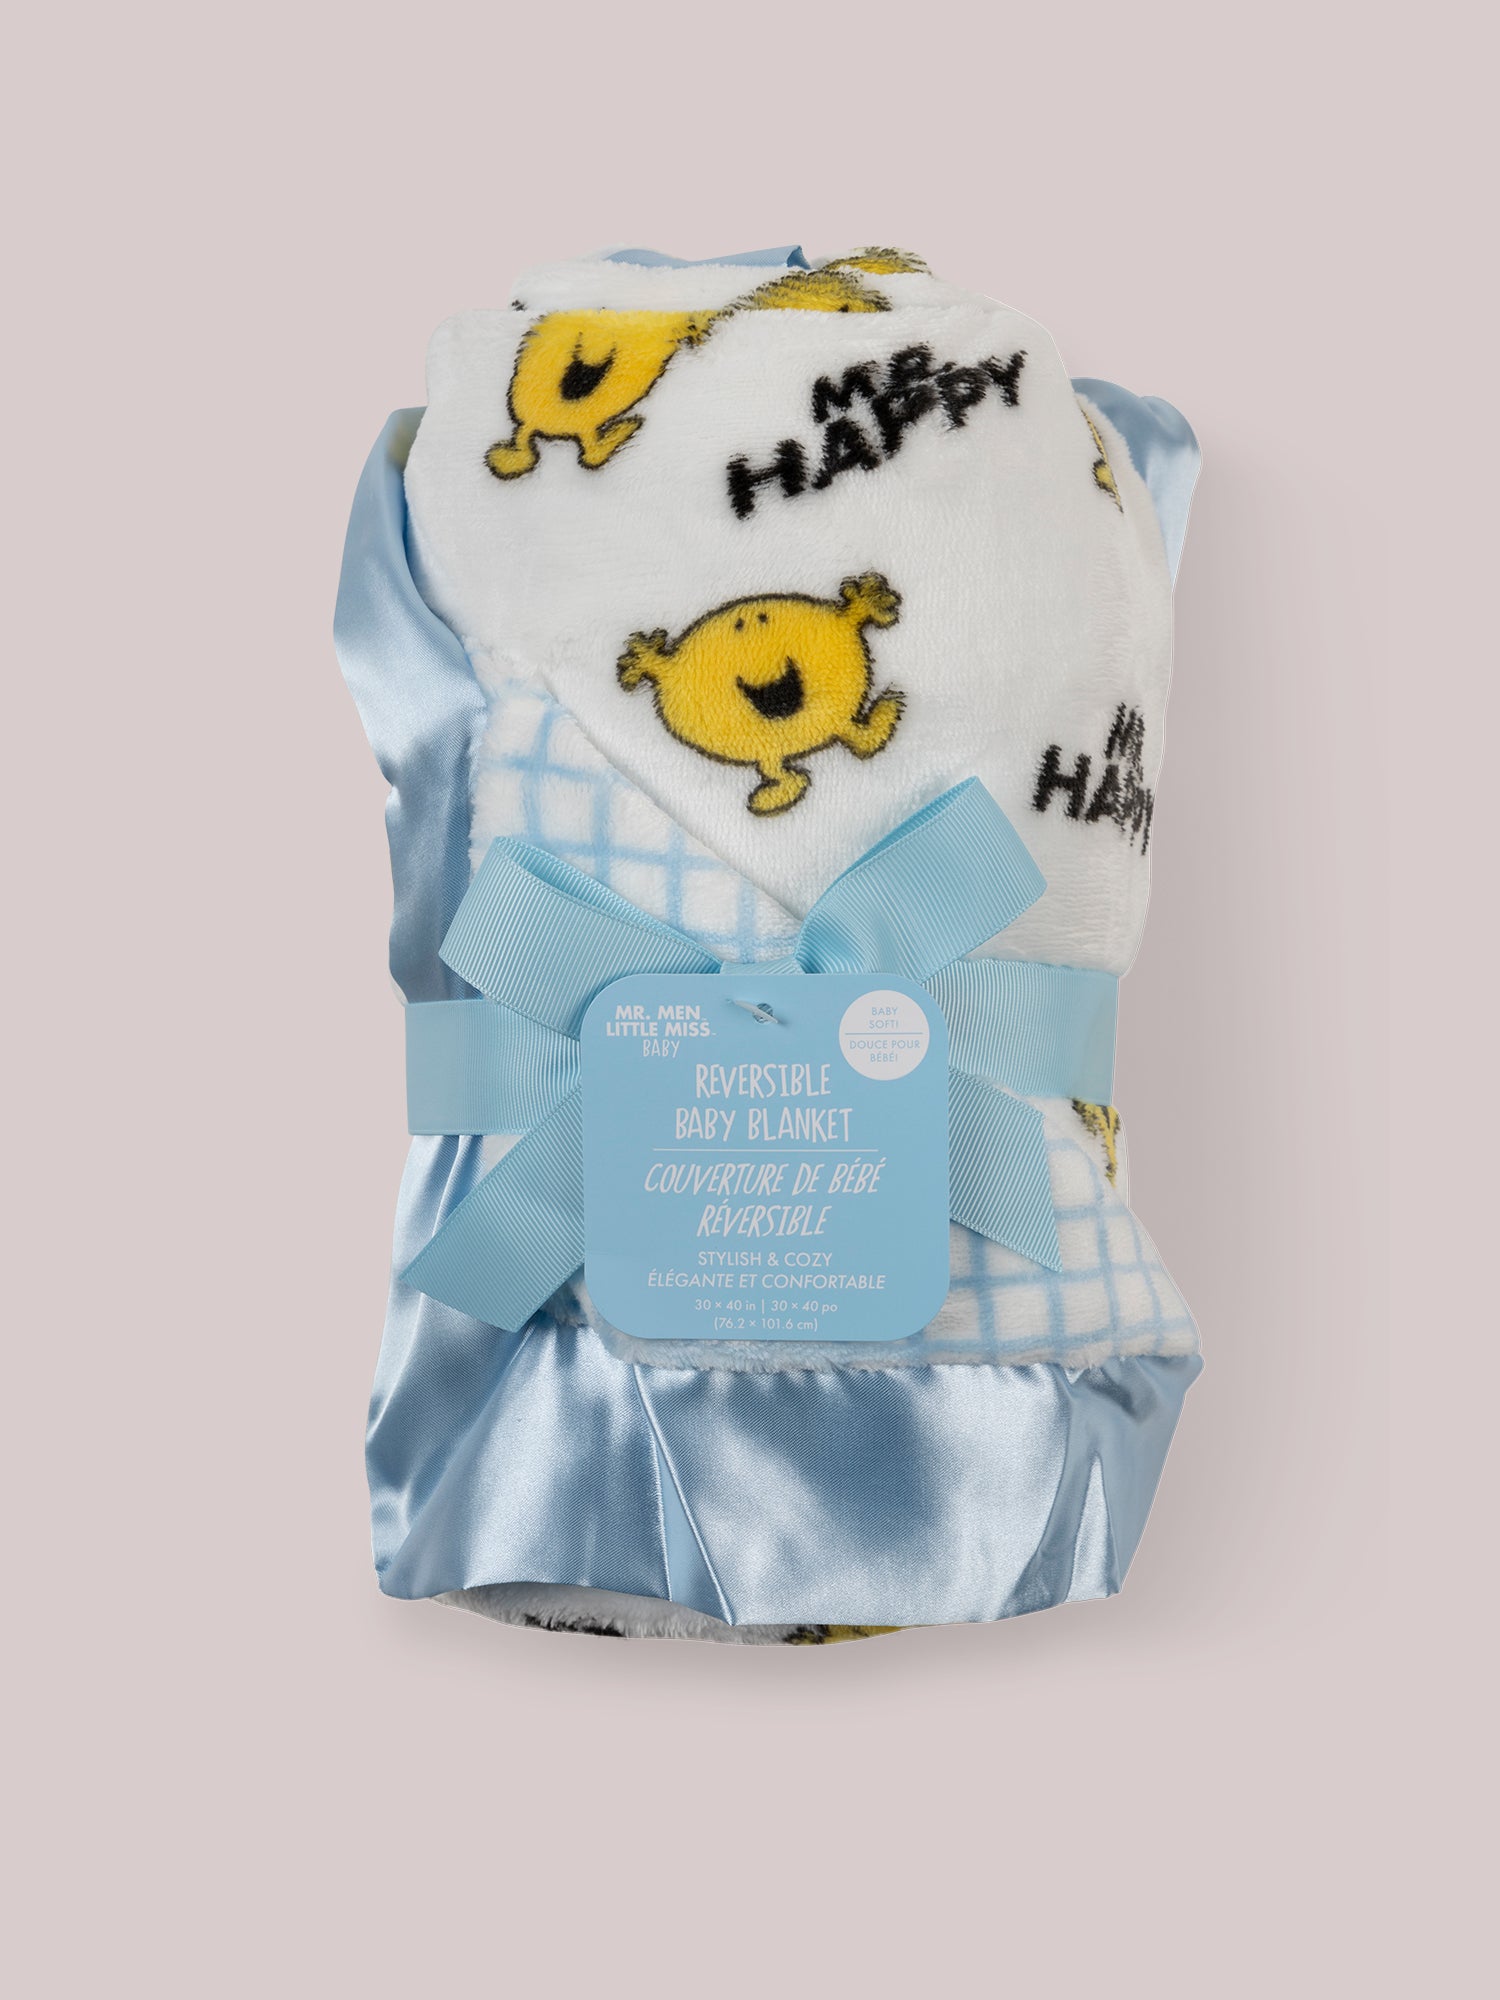 Mr. Happy Reversible Blanket rolled up with tag